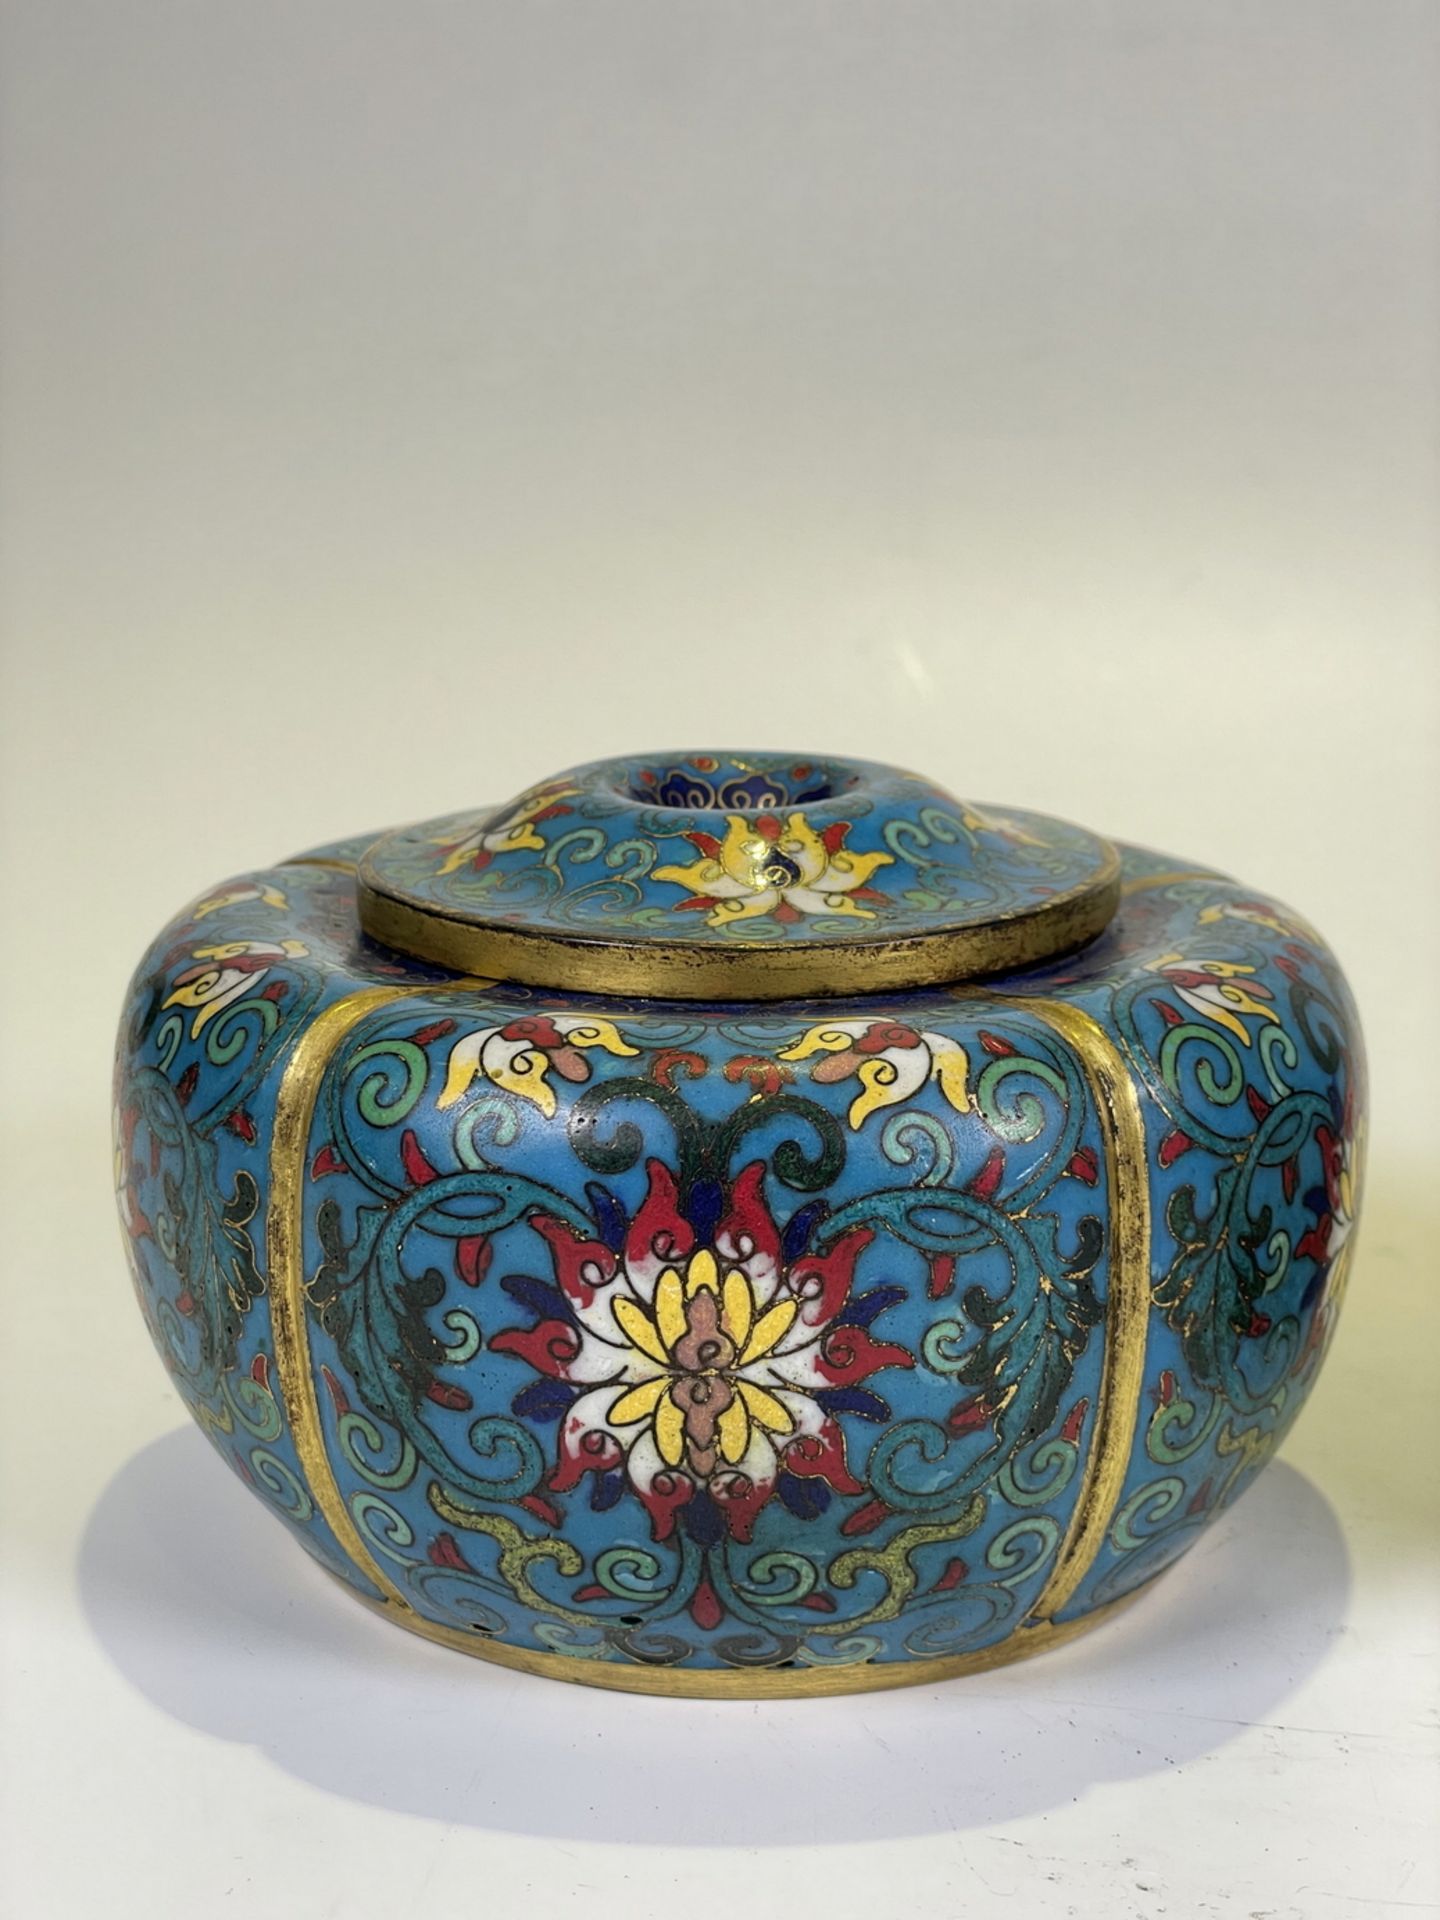 FINE CHINESE CLOISONNE, 18TH/19TH Century Pr. Collection of NARA private gallary.  - Bild 3 aus 6